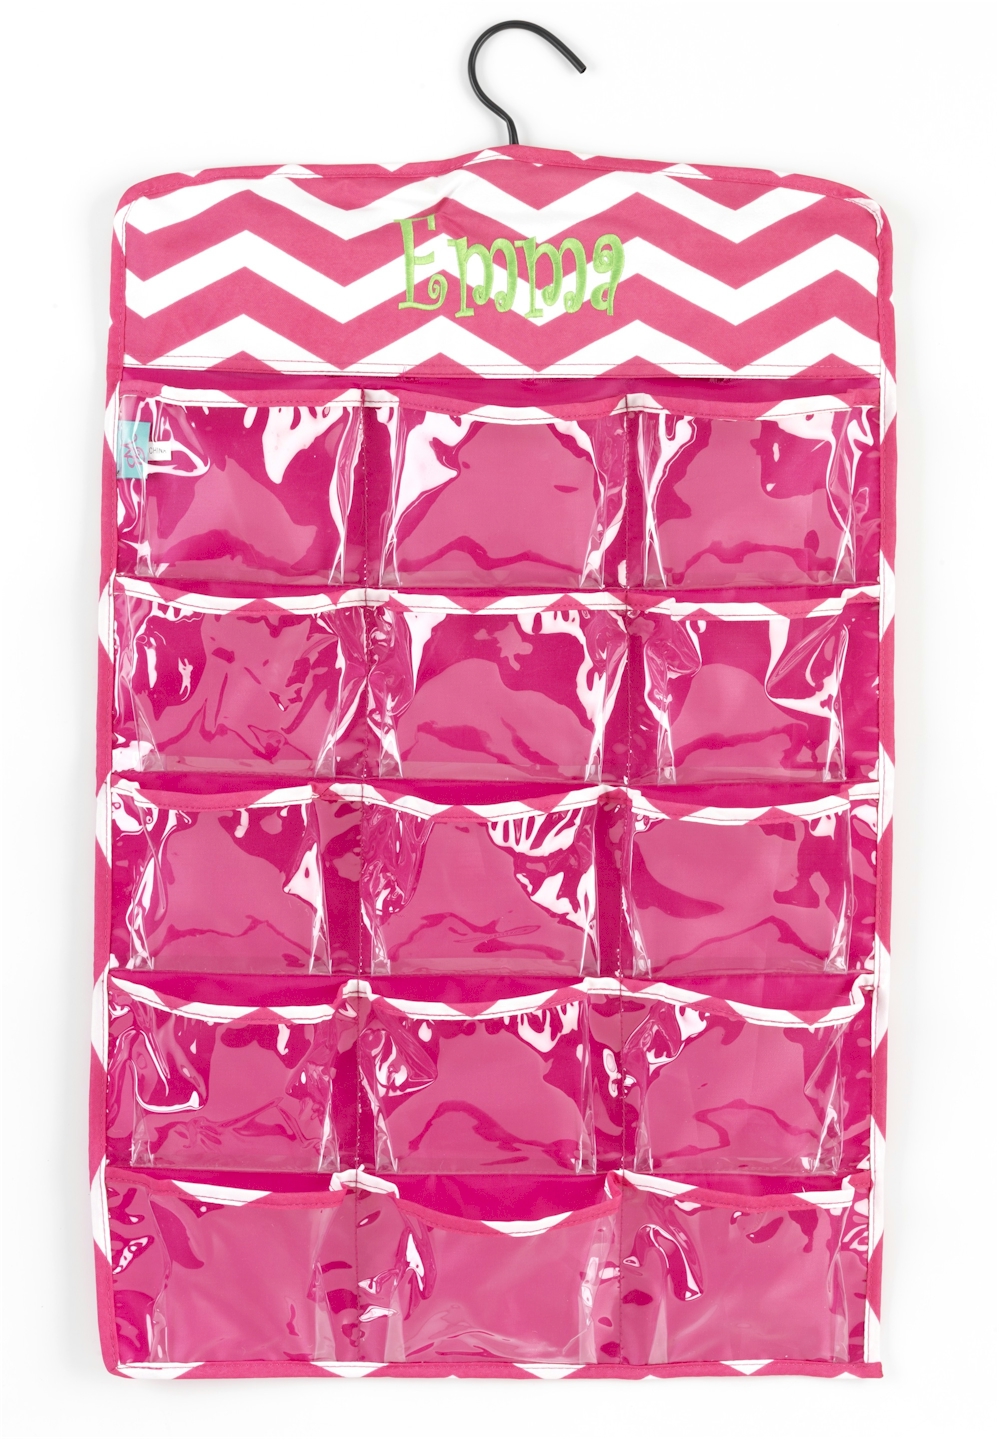 Hanging Organizer Embroidery Blanks - HOT PINK CHEVRON